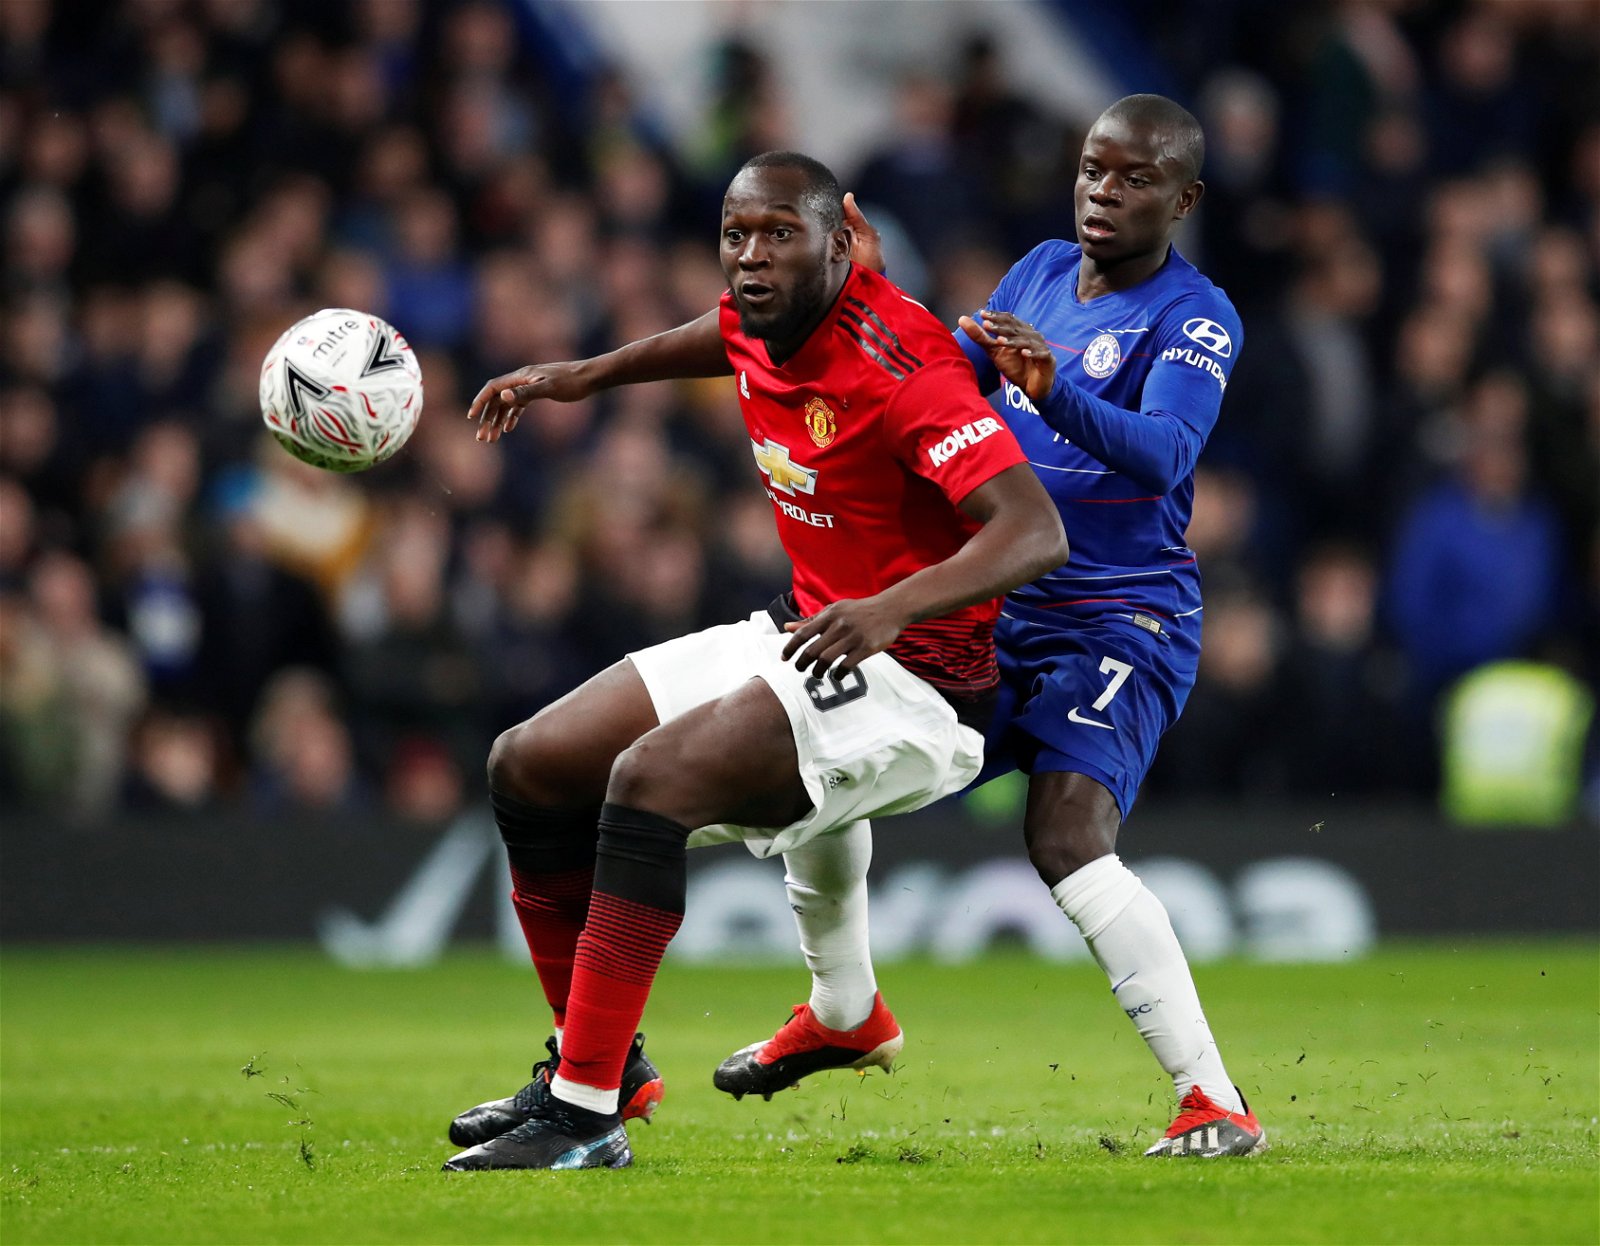 Wenger says how Sarri must use Kante